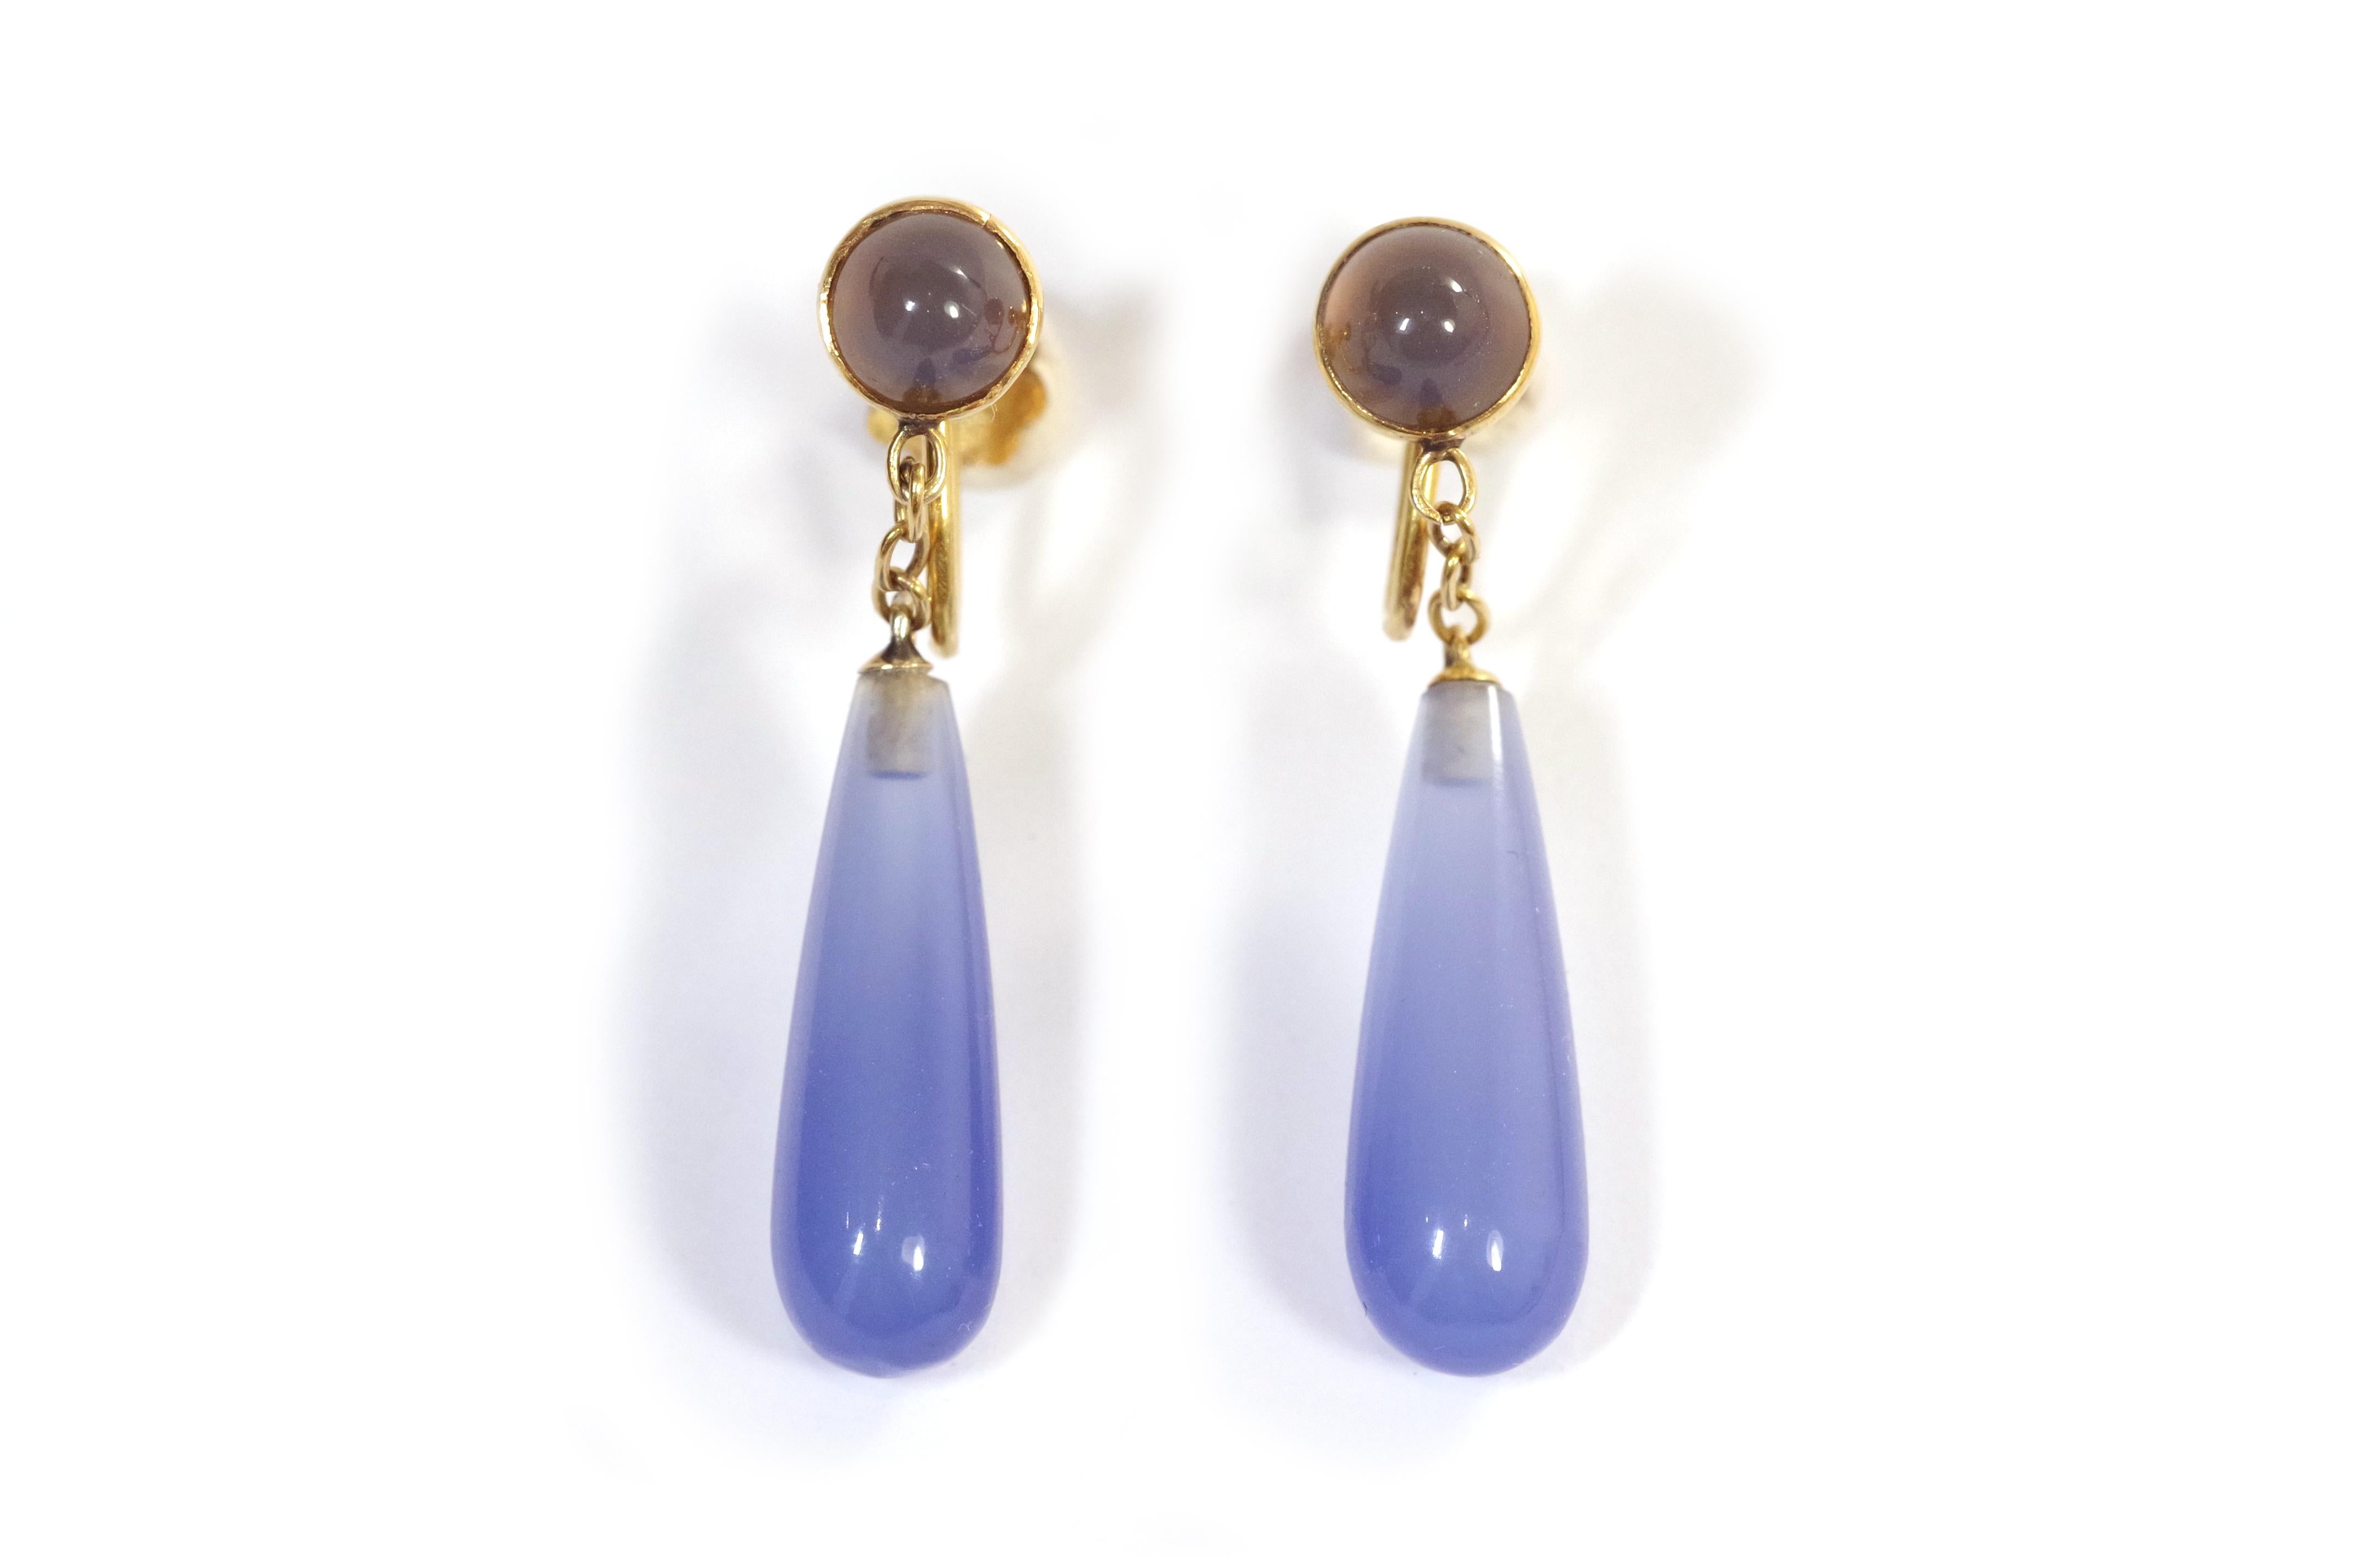 Edwardian blue chalcedony earrings in 18-karat yellow gold. Long earrings set with a cabochon and a blue-tinted chalcedony drop. The reverse of the clasp is decorated with a flower. Clips earrings from the early 20th century, Edwardian period.

Owl